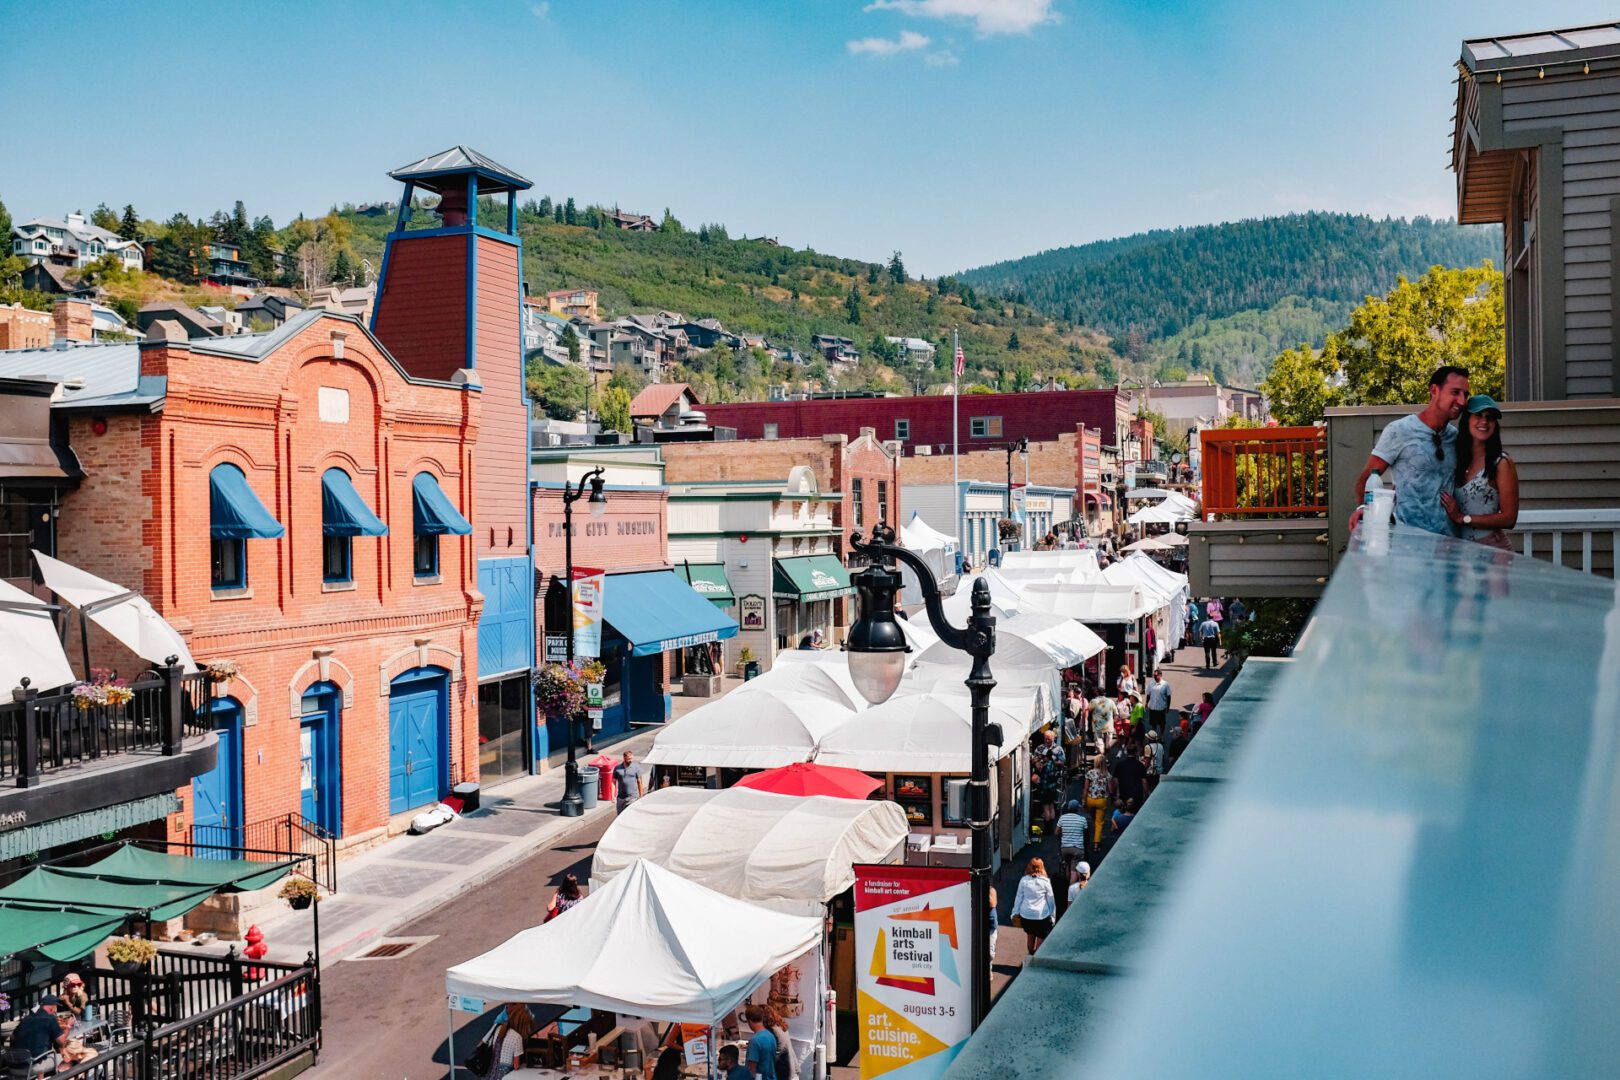 Park City by day with an array of booths